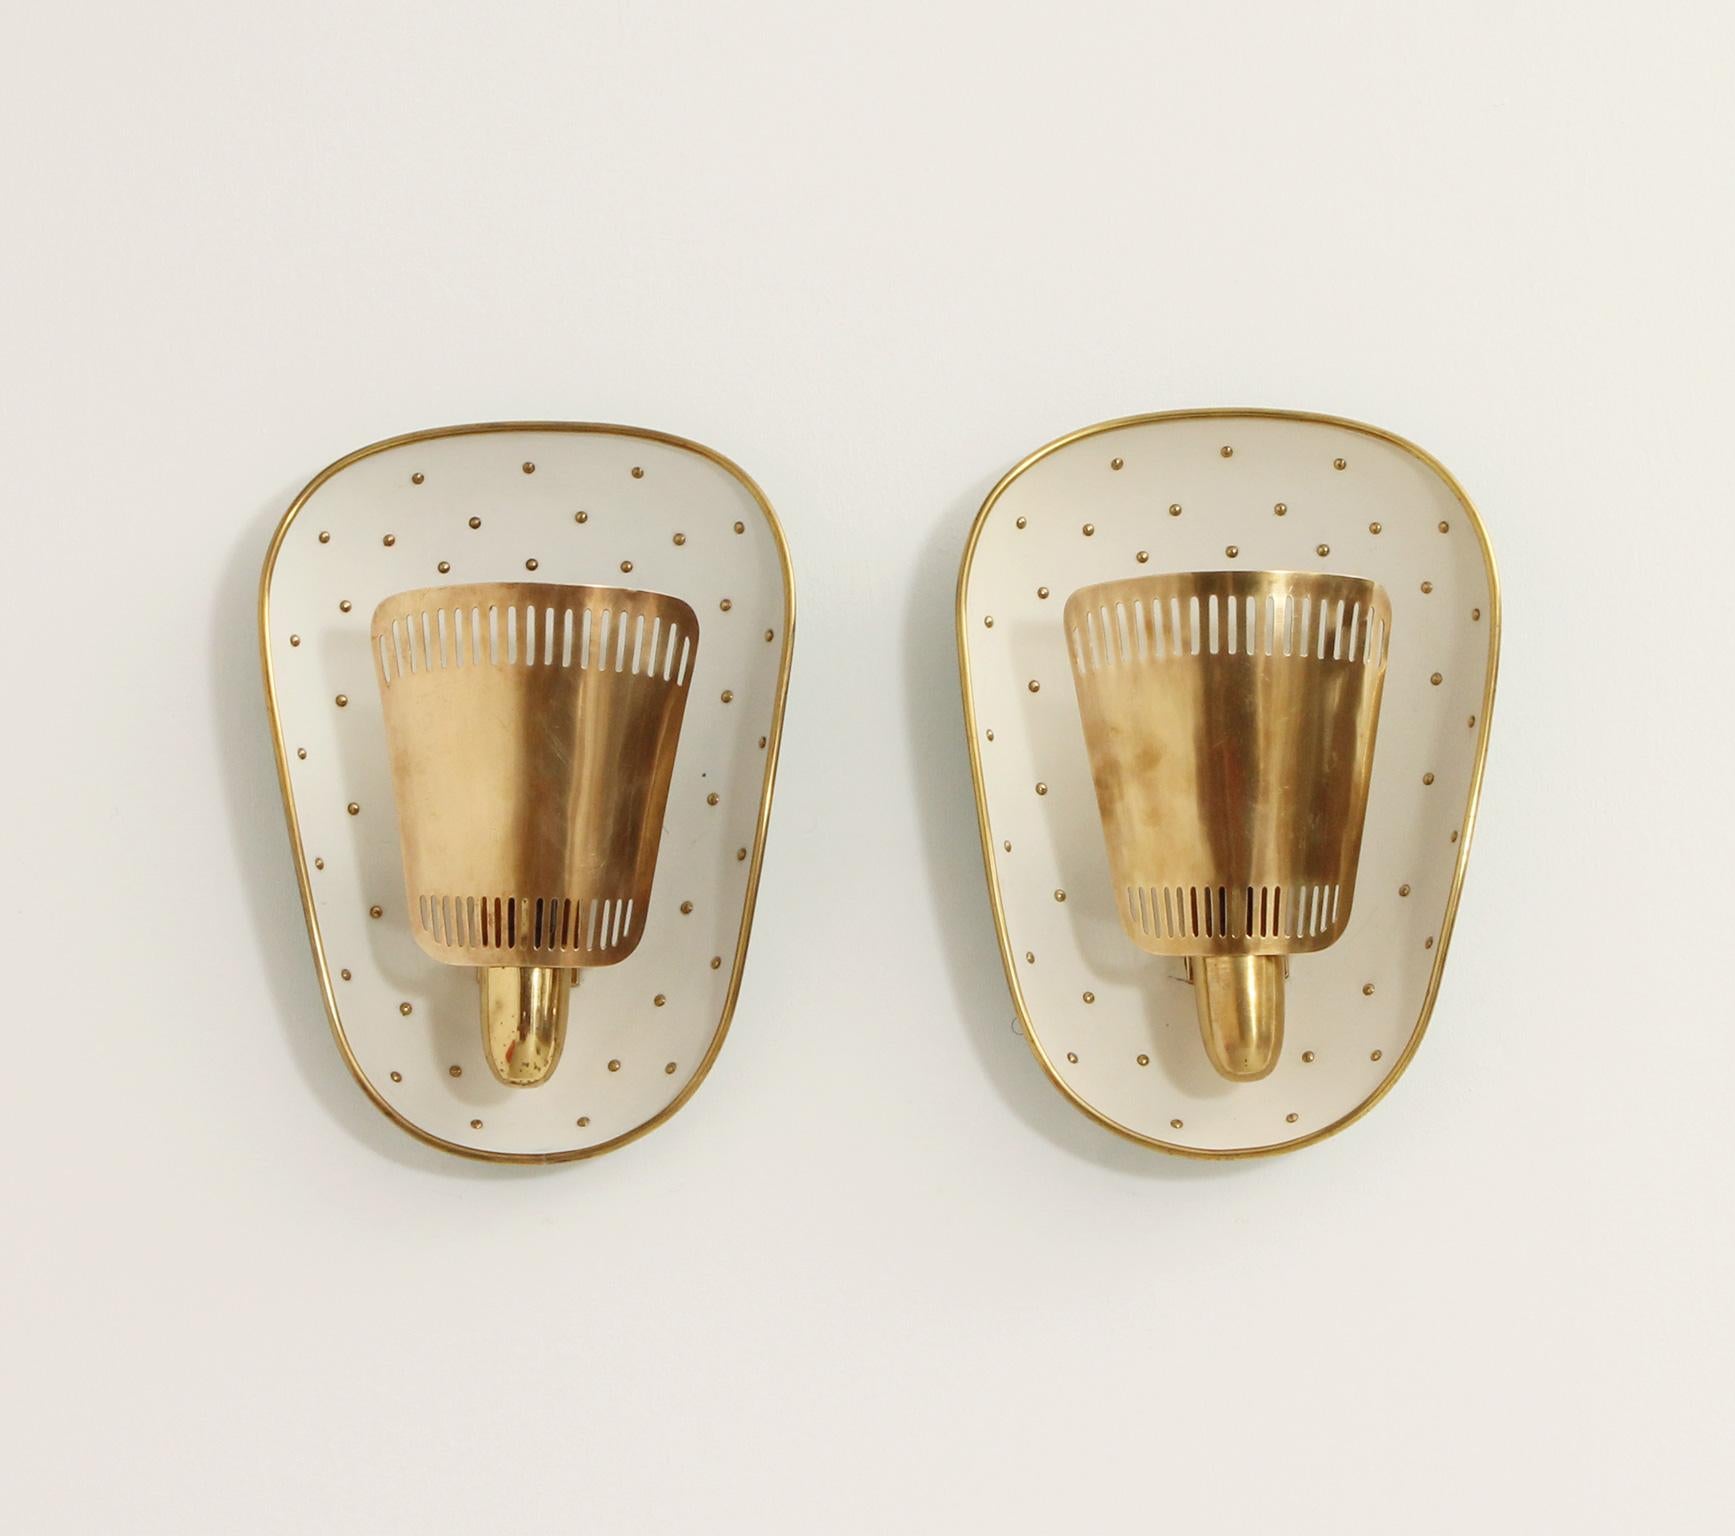 Mid-Century Modern Large Midcentury Sconces Attributed to Hillebrand, Germany, 1950s For Sale